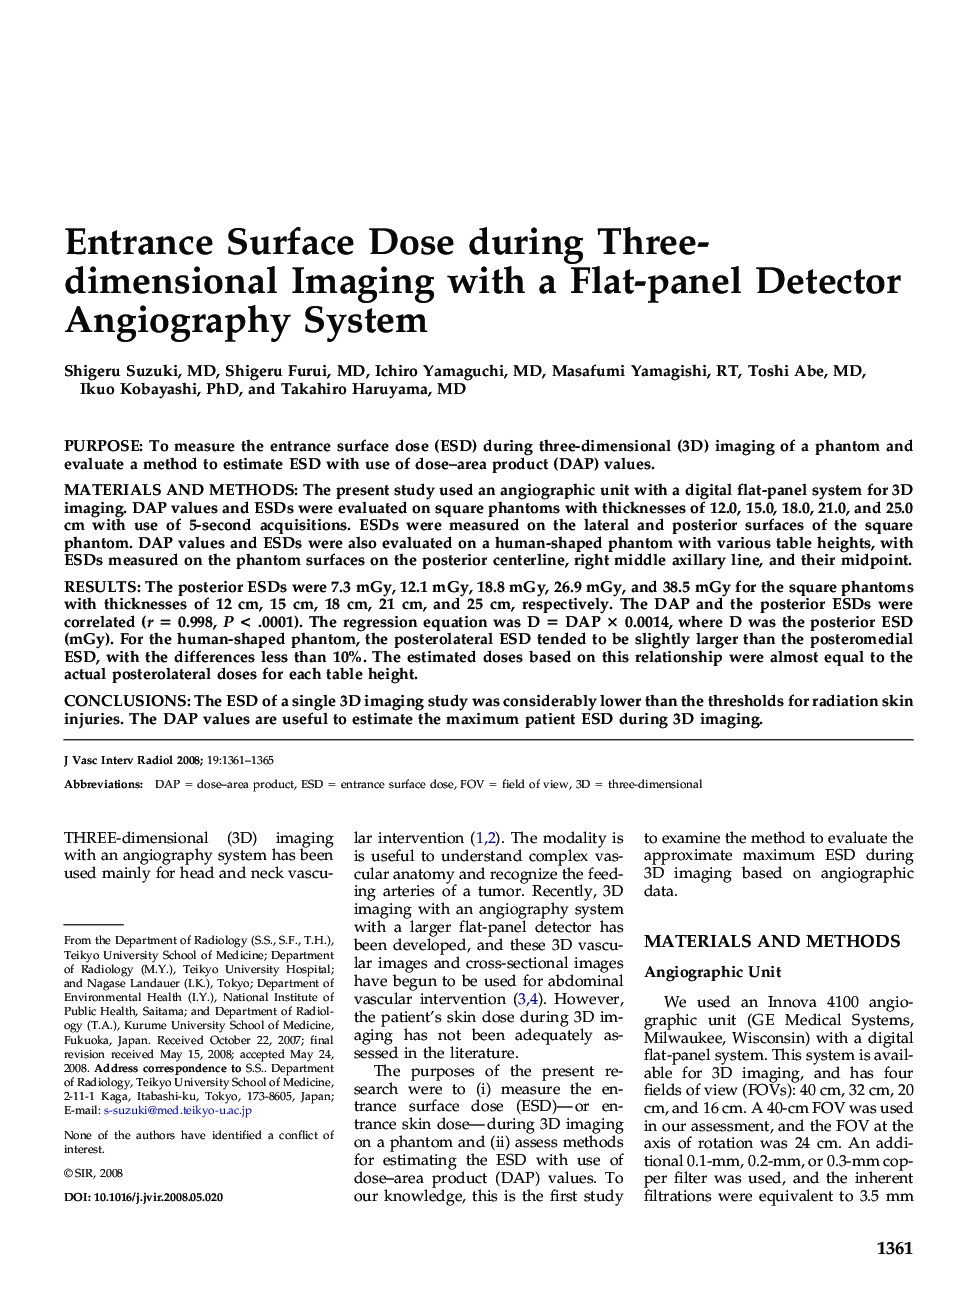 Entrance Surface Dose during Three-dimensional Imaging with a Flat-panel Detector Angiography System